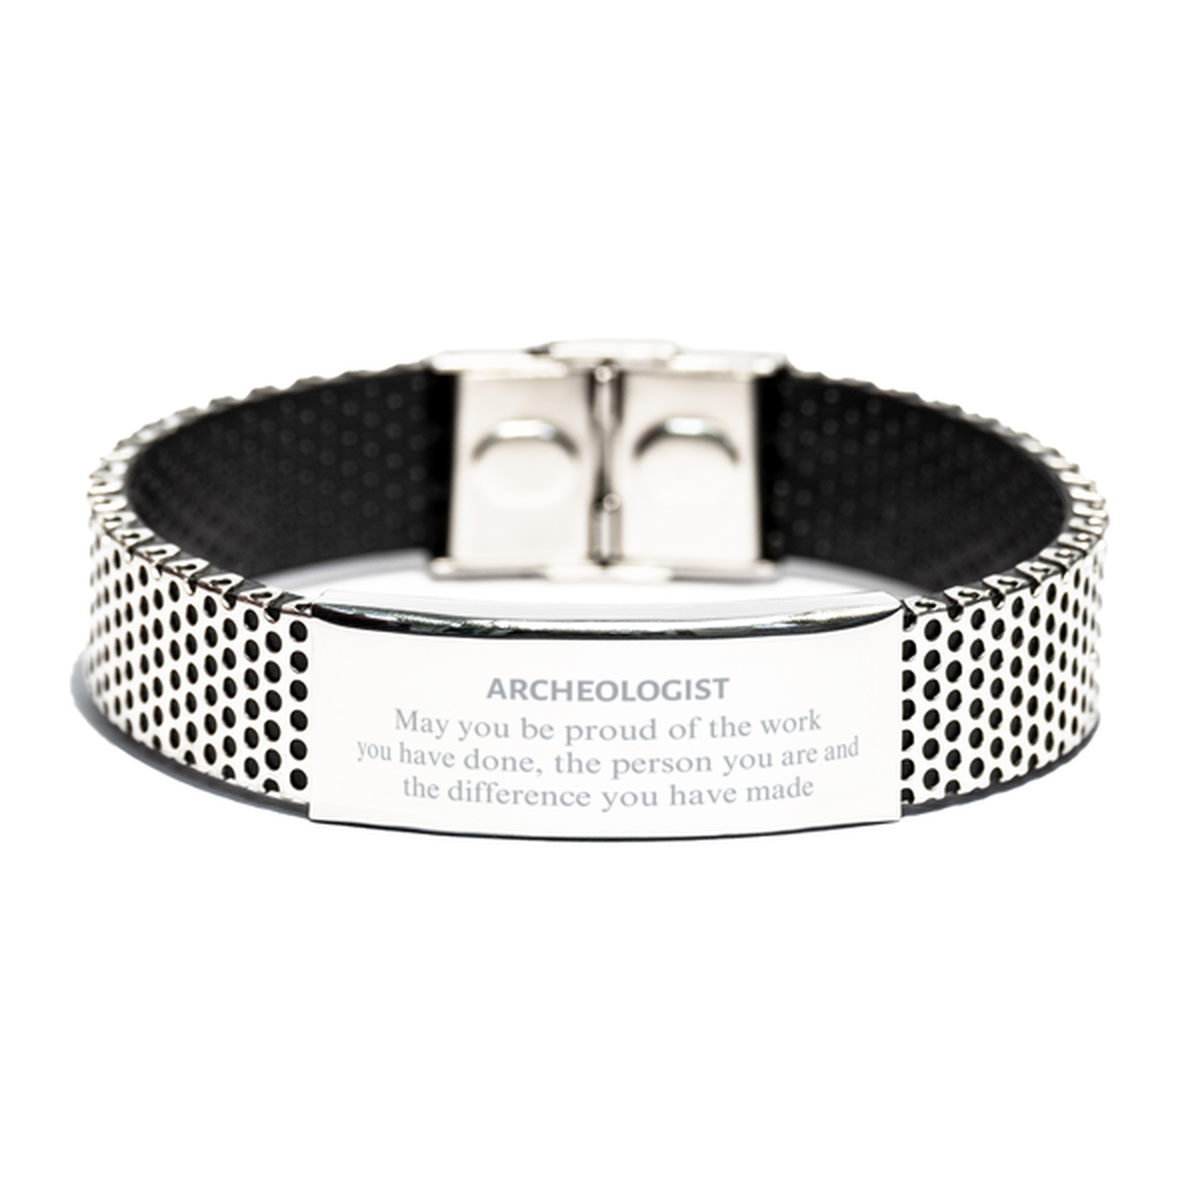 Archeologist May you be proud of the work you have done, Retirement Archeologist Stainless Steel Bracelet for Colleague Appreciation Gifts Amazing for Archeologist